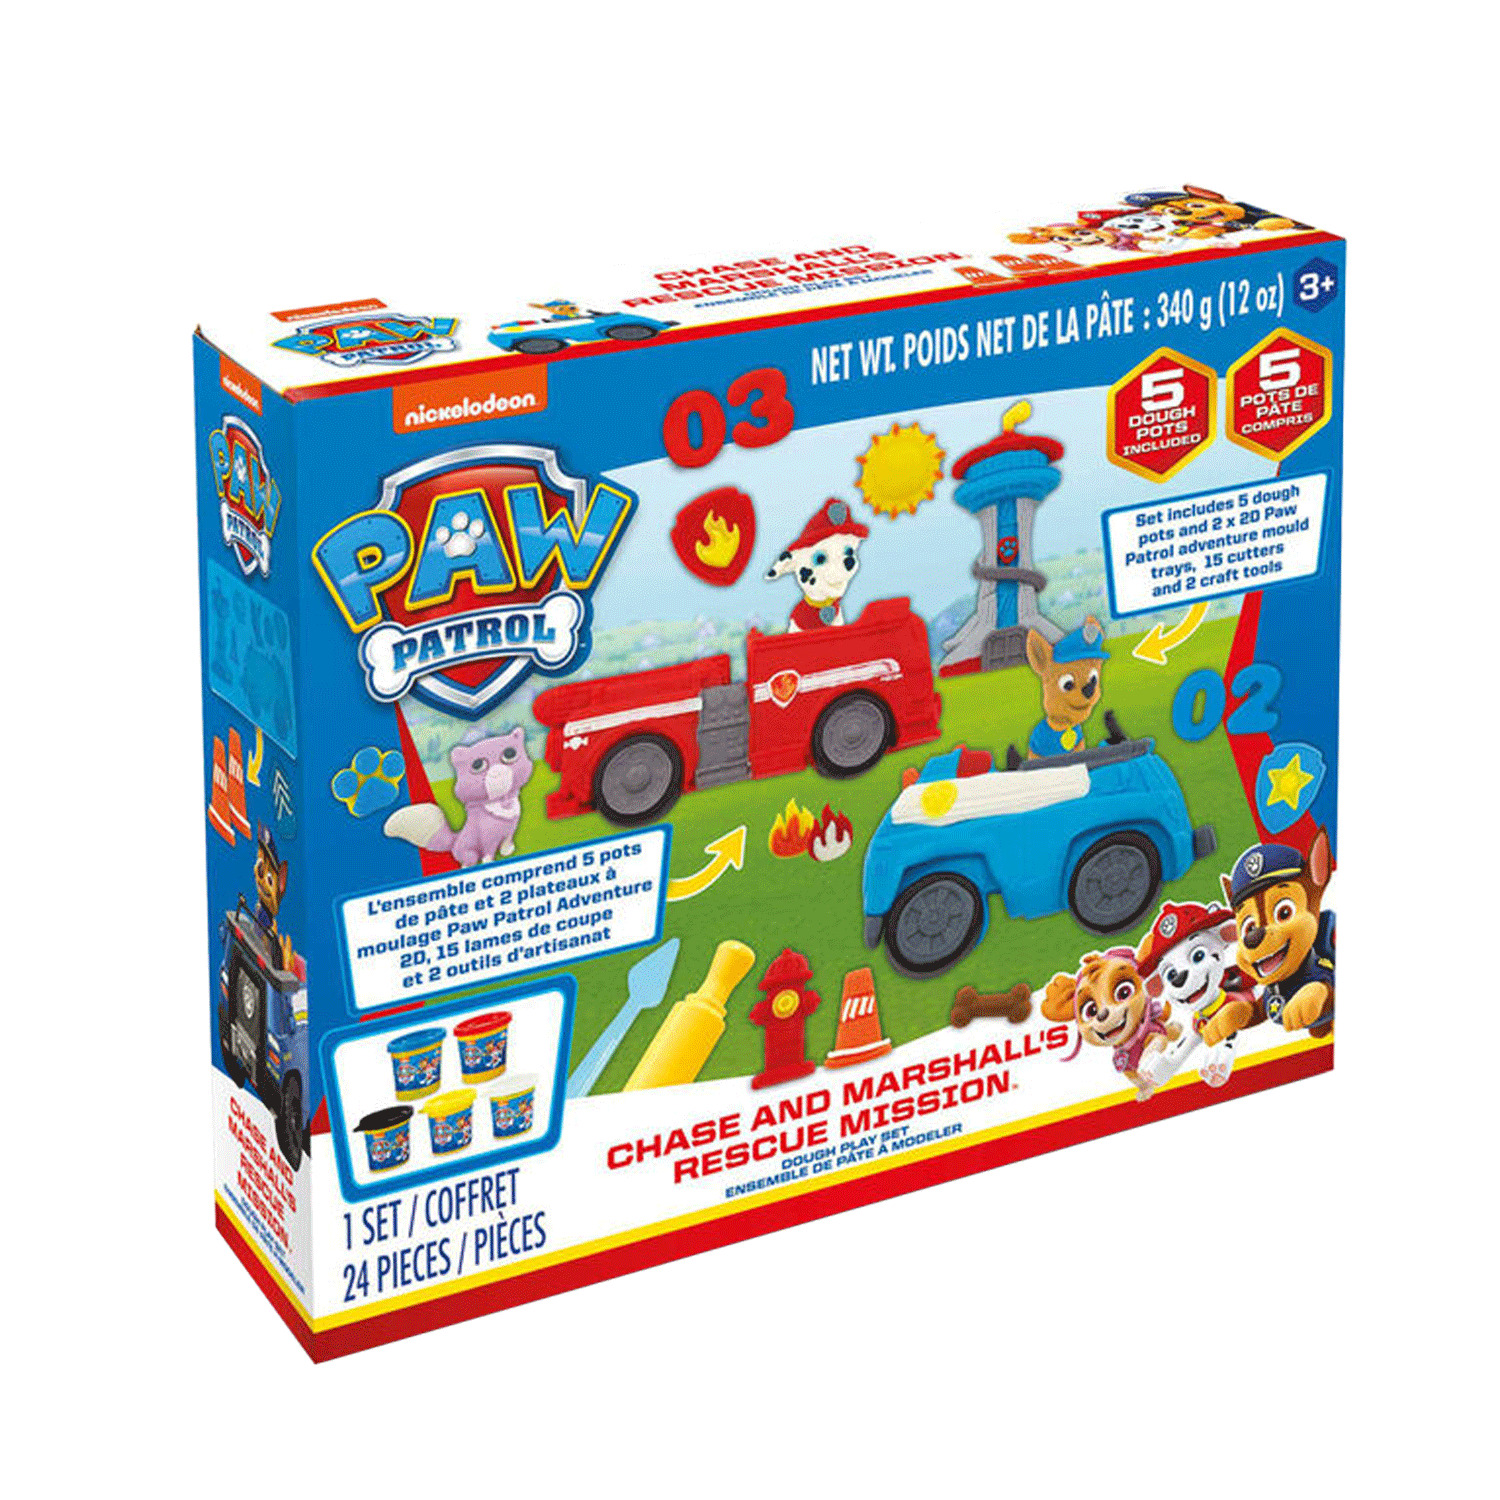 Nickelodeon - Paw Patrol - Chase and Marshall's rescue mission